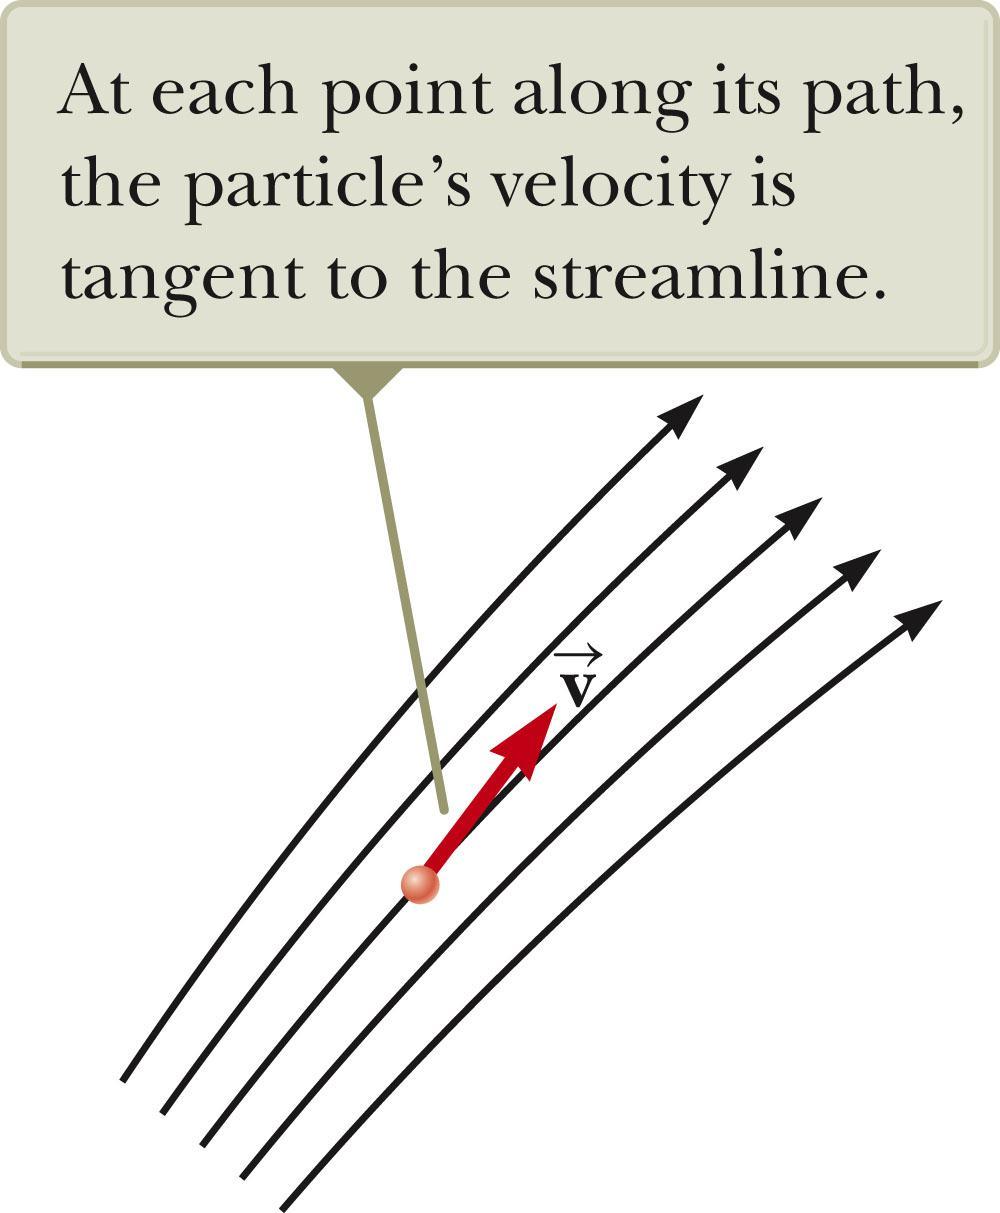 Streamlines The path the particle takes in steady flow is a streamline. The velocity of the particle is tangent to the streamline.